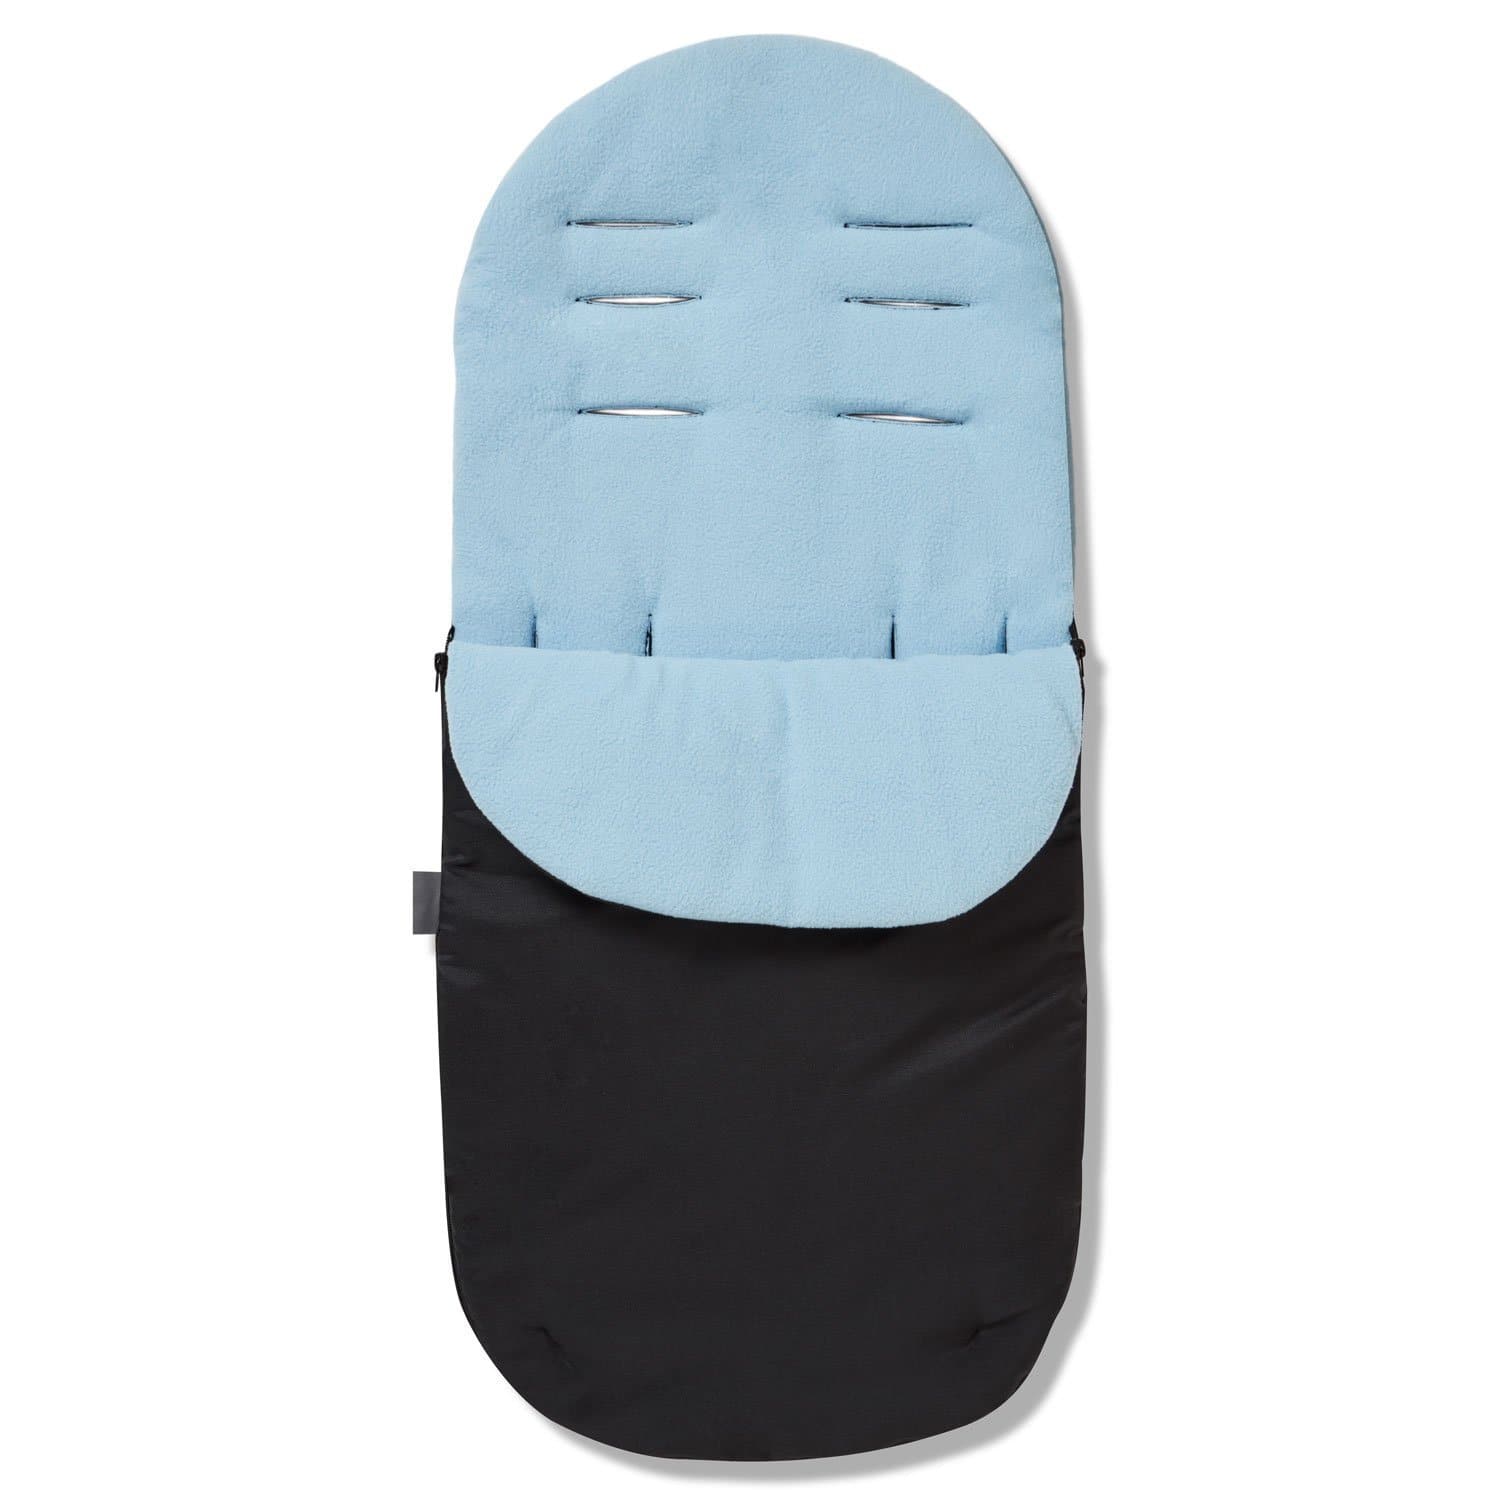 Footmuff / Cosy Toes Compatible with Hesba - Light Blue / Fits All Models | For Your Little One